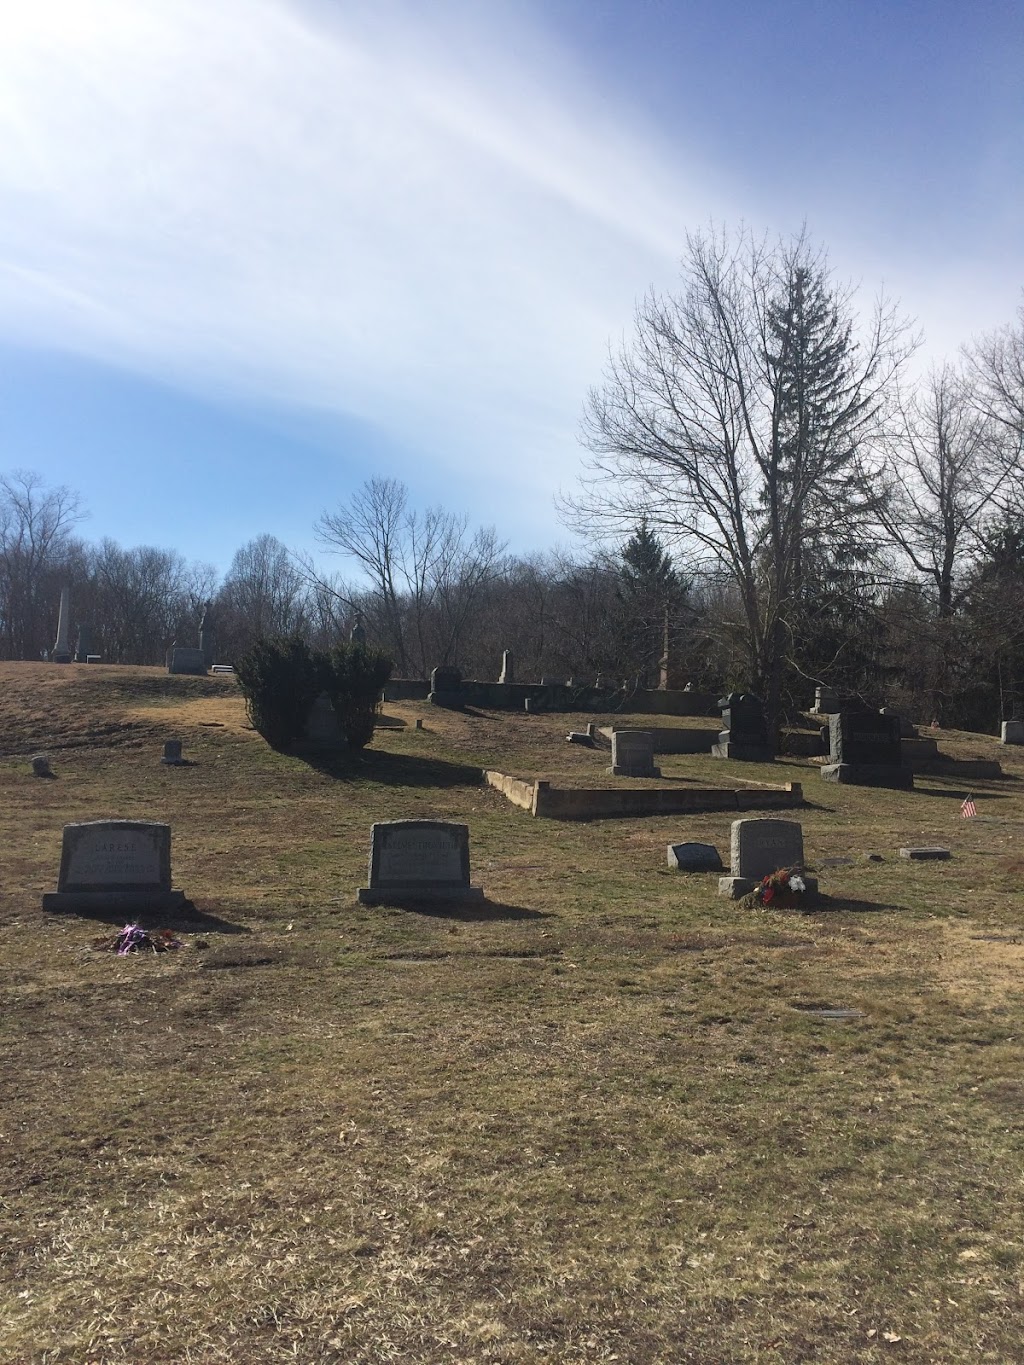 St. Johns Cemetery | 86 S Main St, Terryville, CT 06786 | Phone: (860) 583-4697